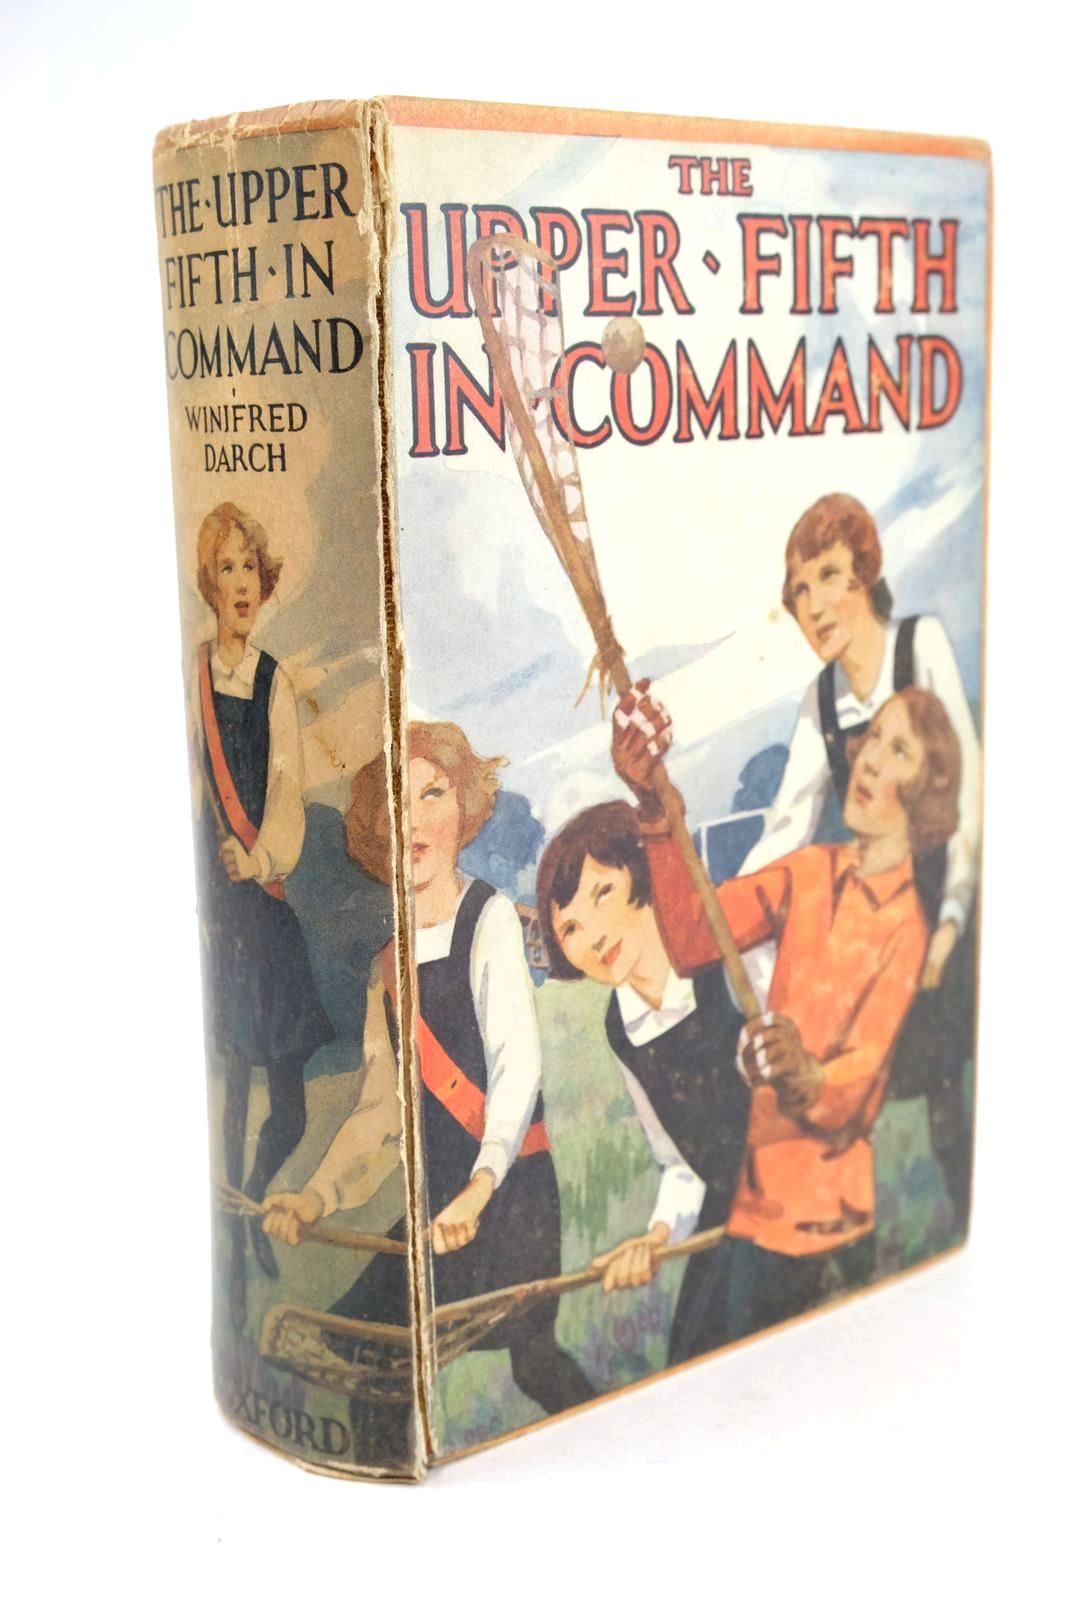 Photo of THE UPPER FIFTH IN COMMAND written by Darch, Winifred illustrated by Johnston, M.D. published by Oxford University Press, Humphrey Milford (STOCK CODE: 1325244)  for sale by Stella & Rose's Books